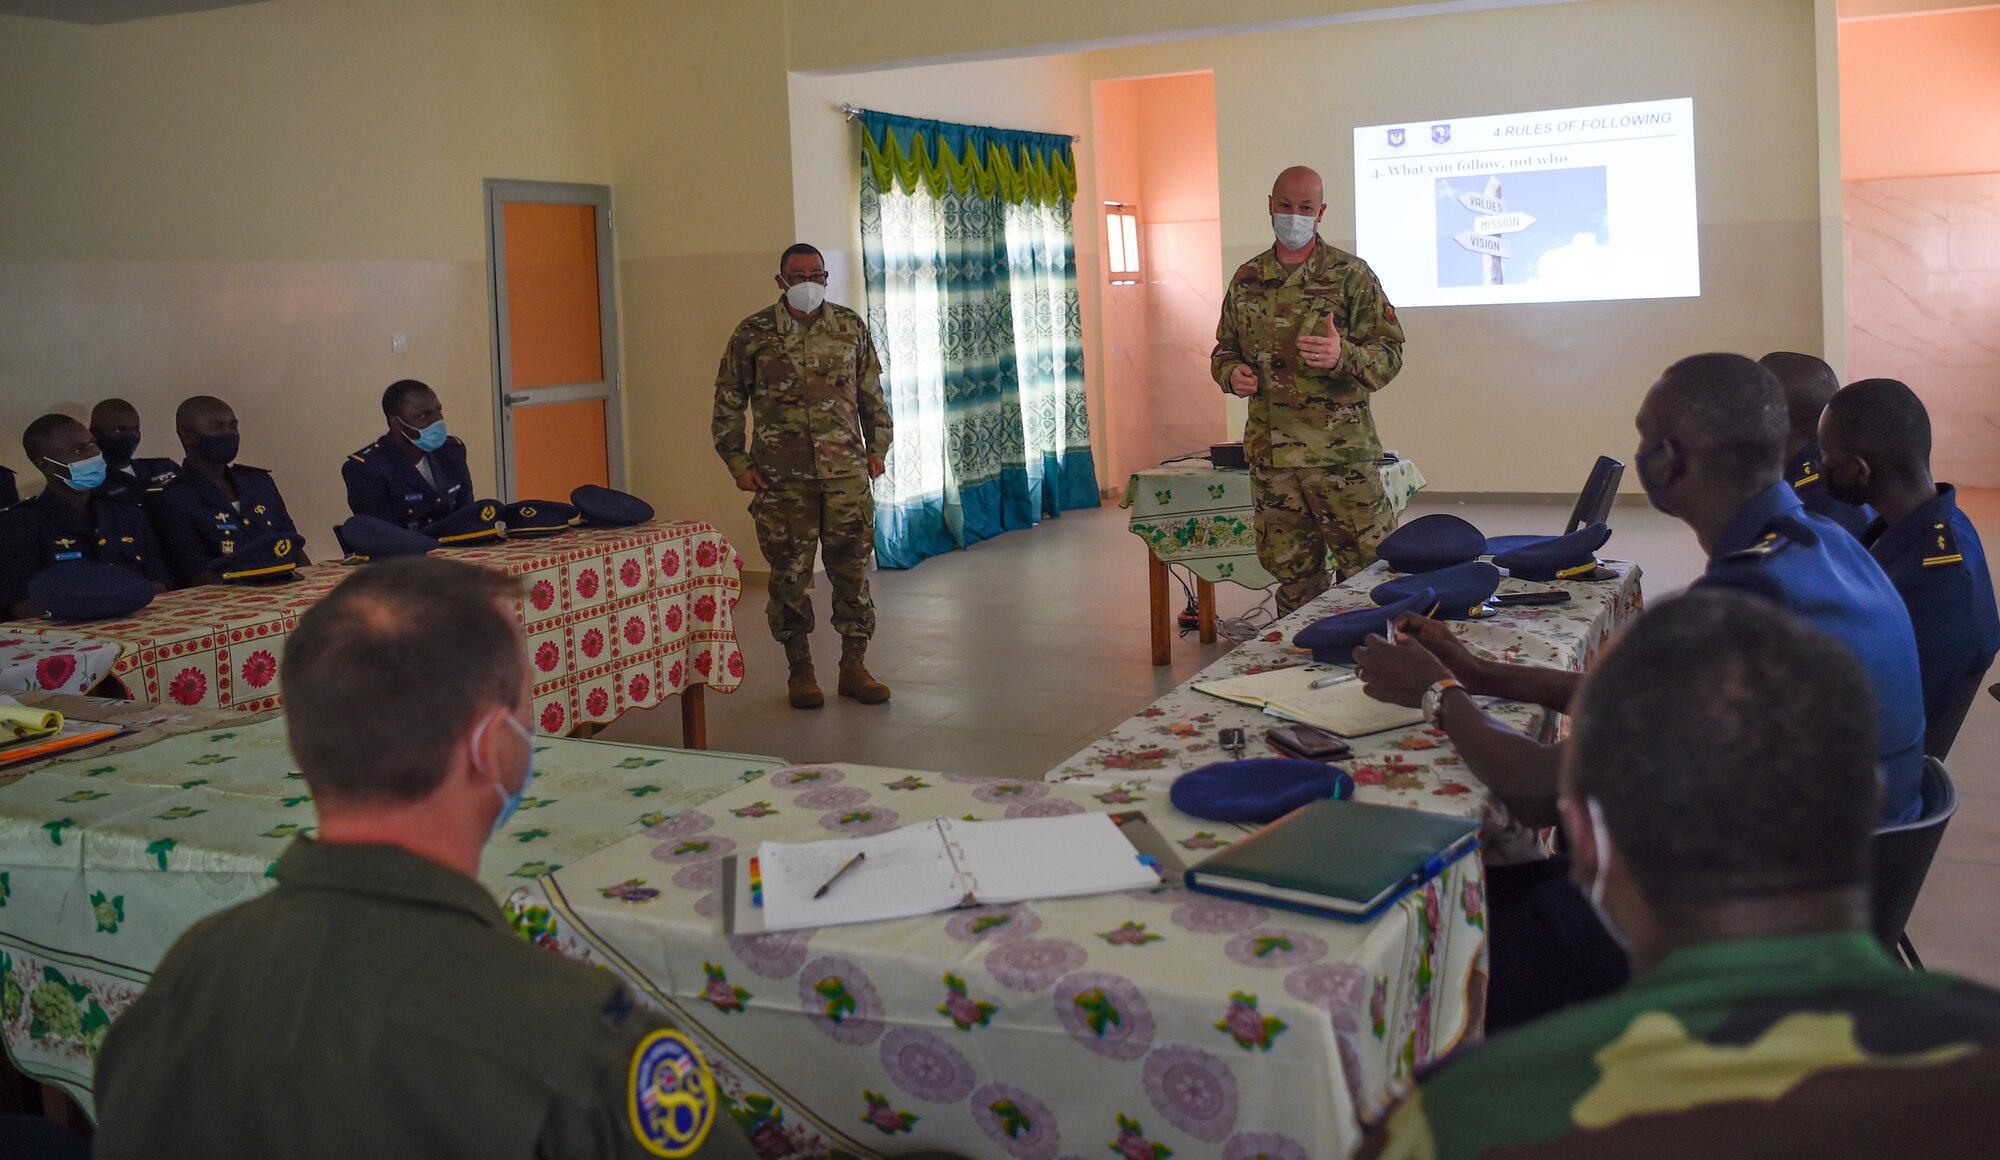 Chief Master Sgt. Terrance Smiley, Kisling Noncommissioned Officer Academy commandant, left, and Brig. Gen. Christopher Ireland, U.S. Air Forces in Europe-Air Forces Africa chief of staff, right, discuss leadership and followership with Senegalese air force members in Thies, Senegal, May 26, 2021. Throughout the engagement, Airmen facilitated several discussions with their Senegalese peers on topics such as leadership, airmanship, administrative processes, doctrine and personnel management.